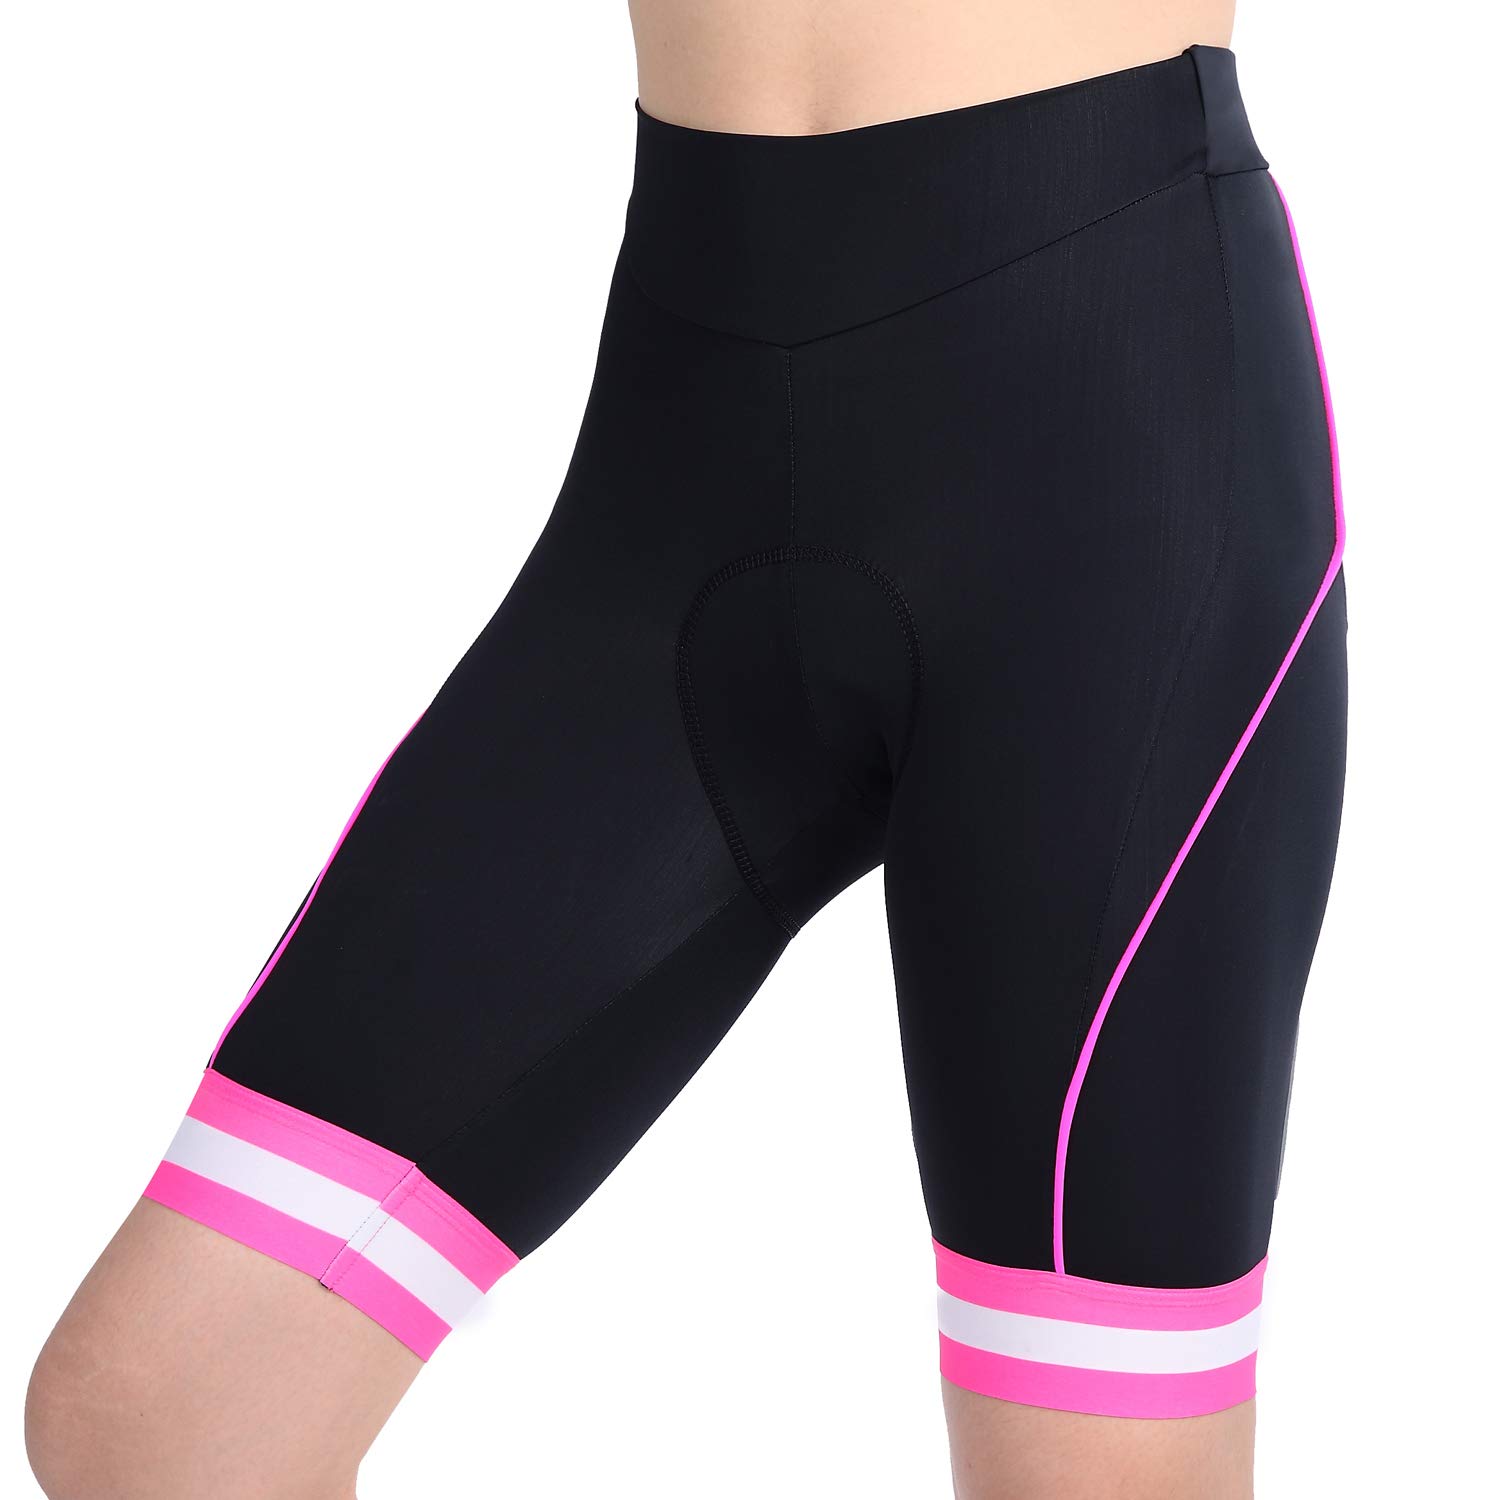 Download Top 10 Best Bike Shorts for Women - Top Value Reviews